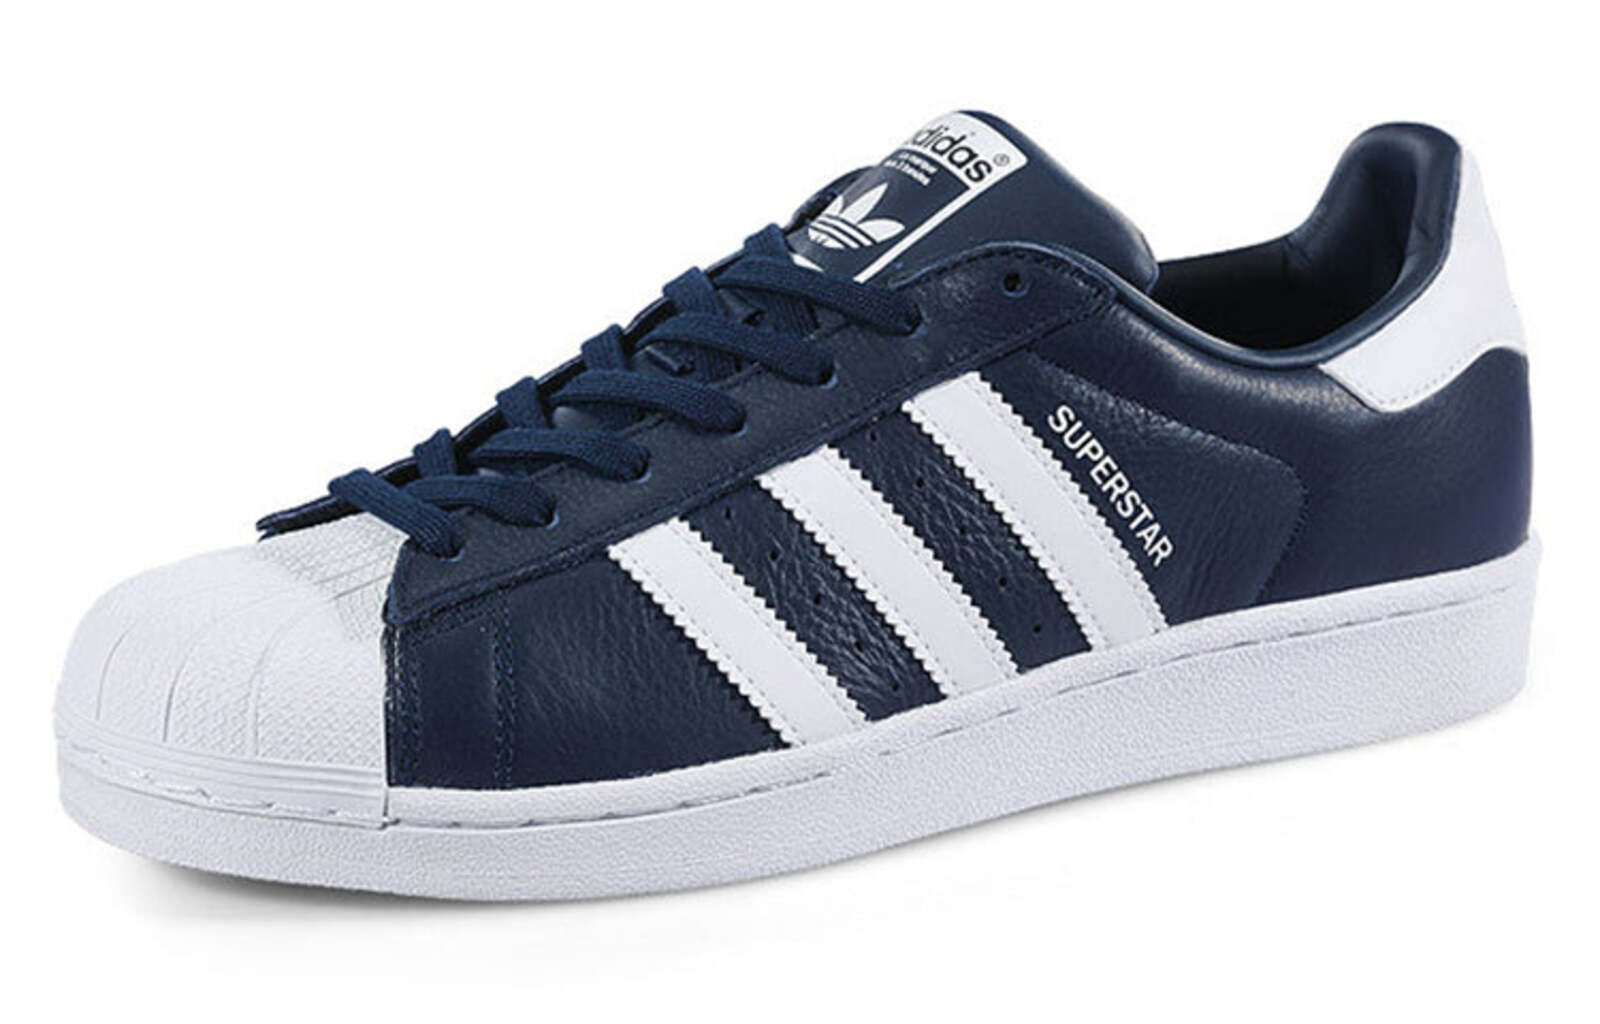 adidas Mens Superstar Casual Shoes